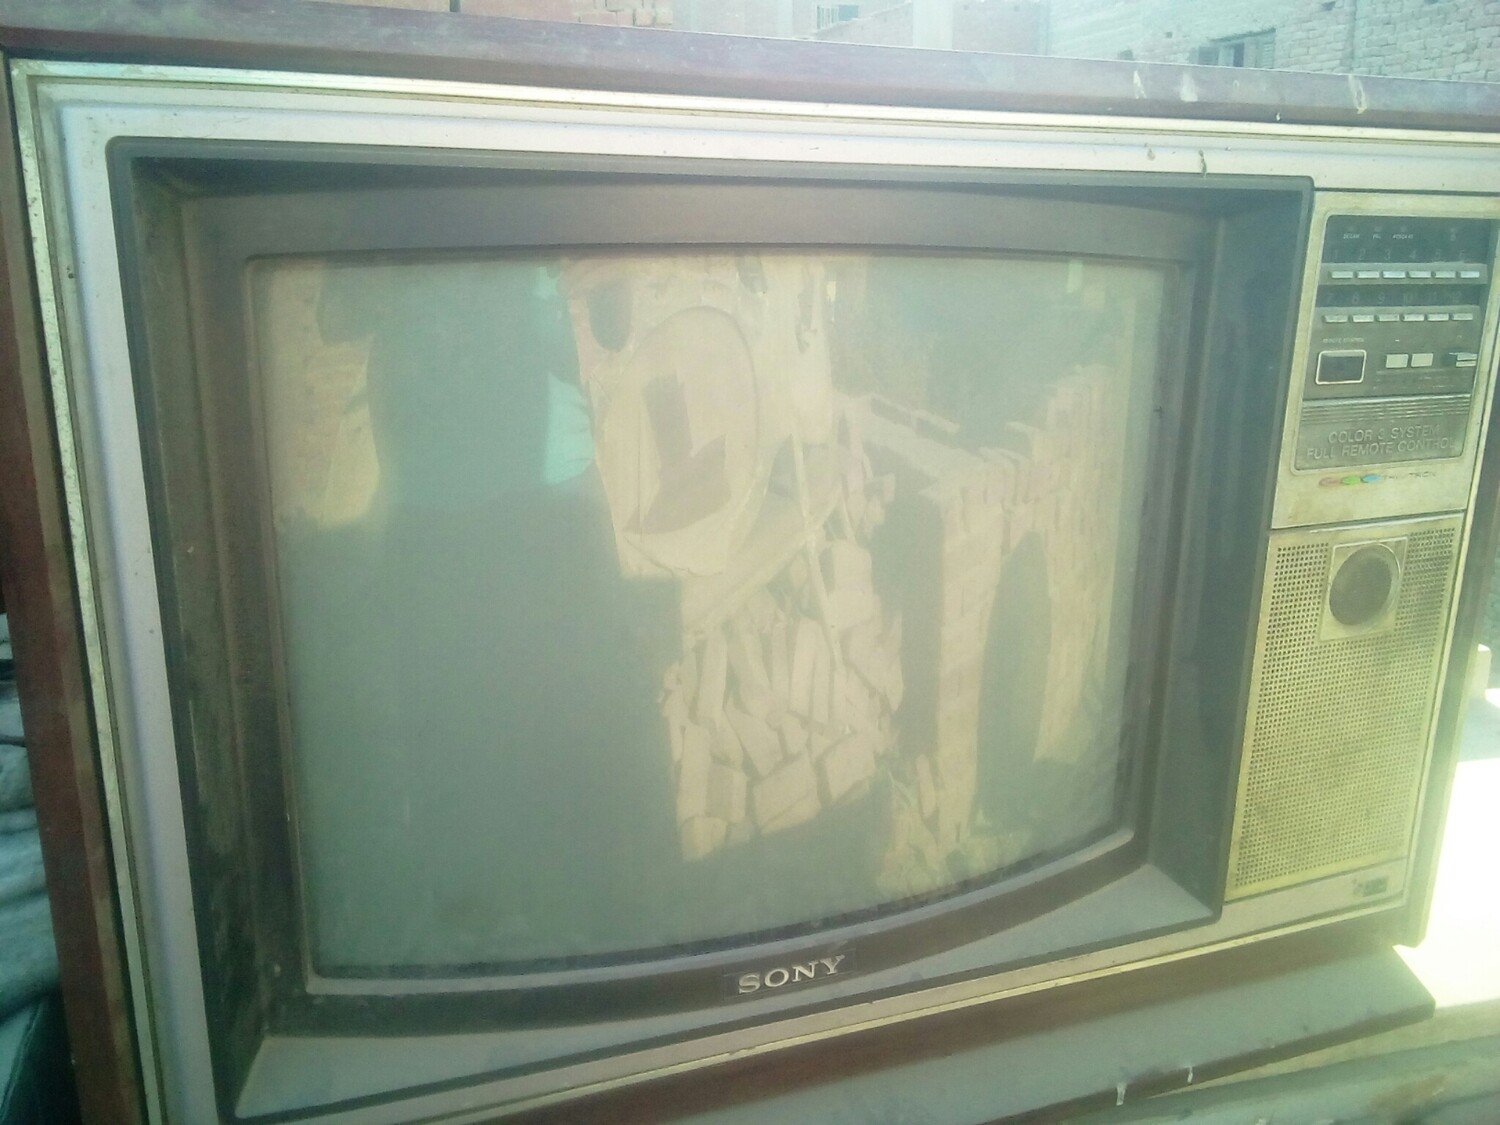 Sony tv old model antique Television